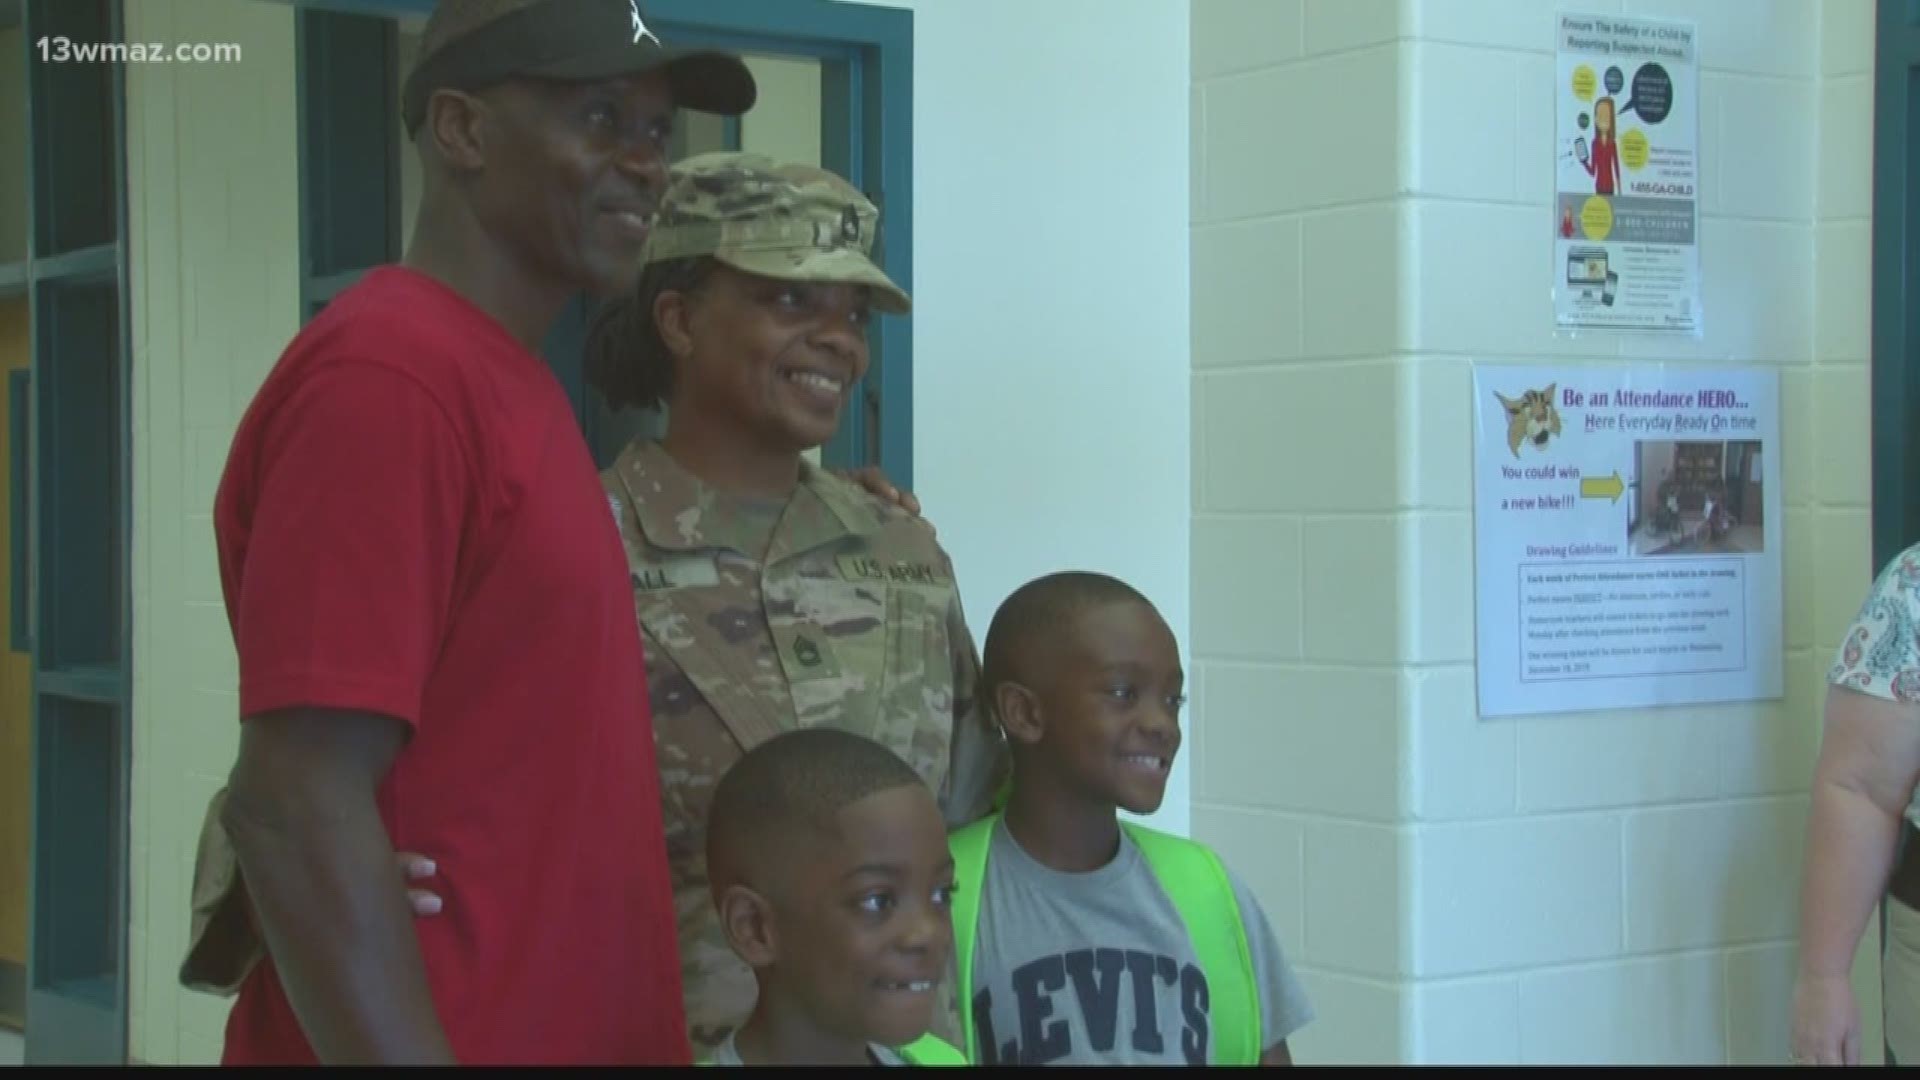 Reuniting never felt so good for one Jones County family Tuesday afternoon. After being deployed for nine months, Tamika Hall finally came back to her family.